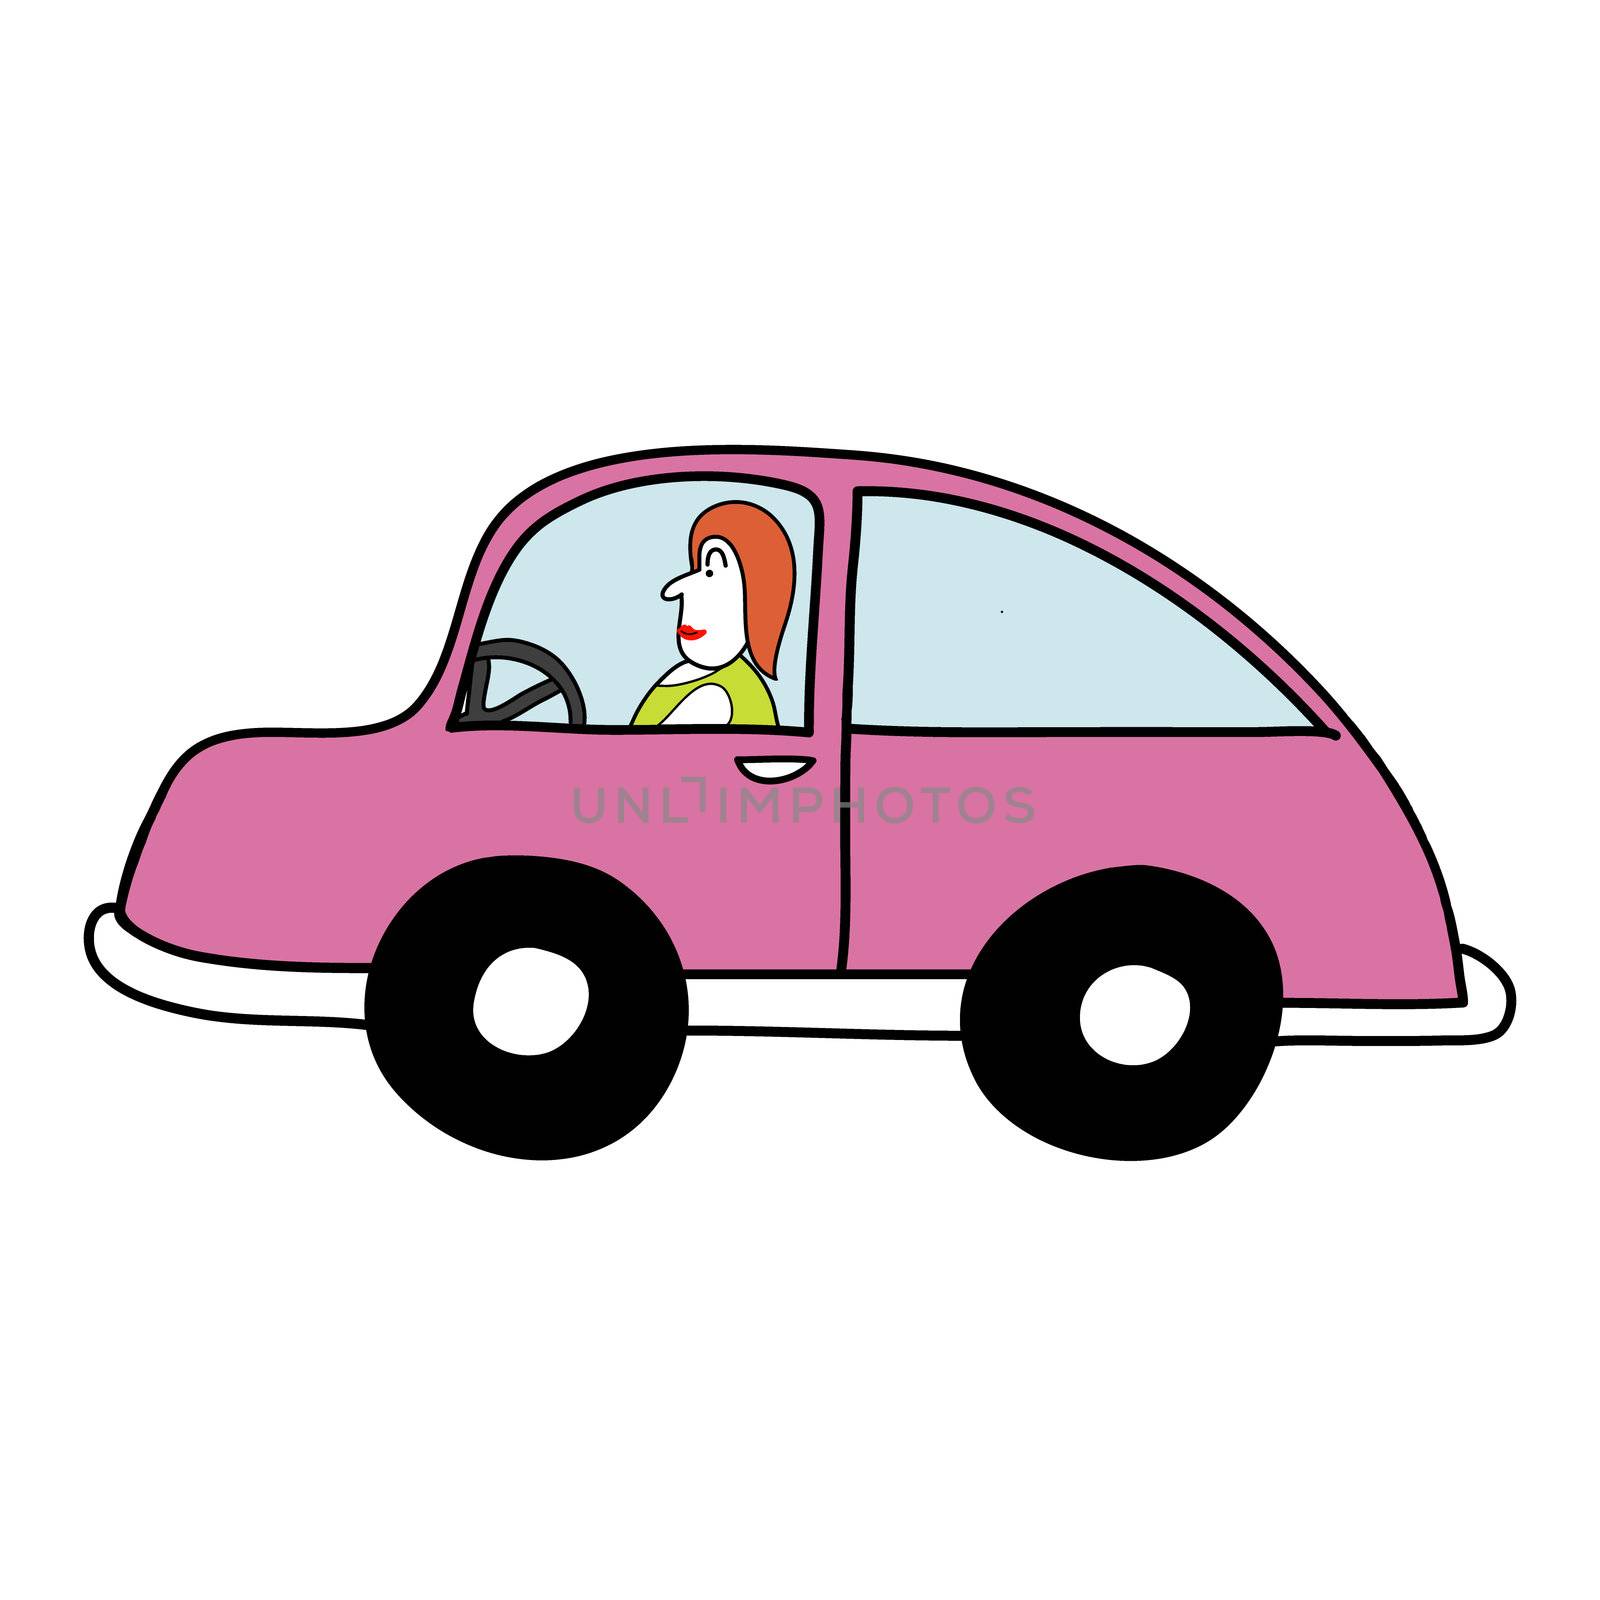 Lady in the pink car